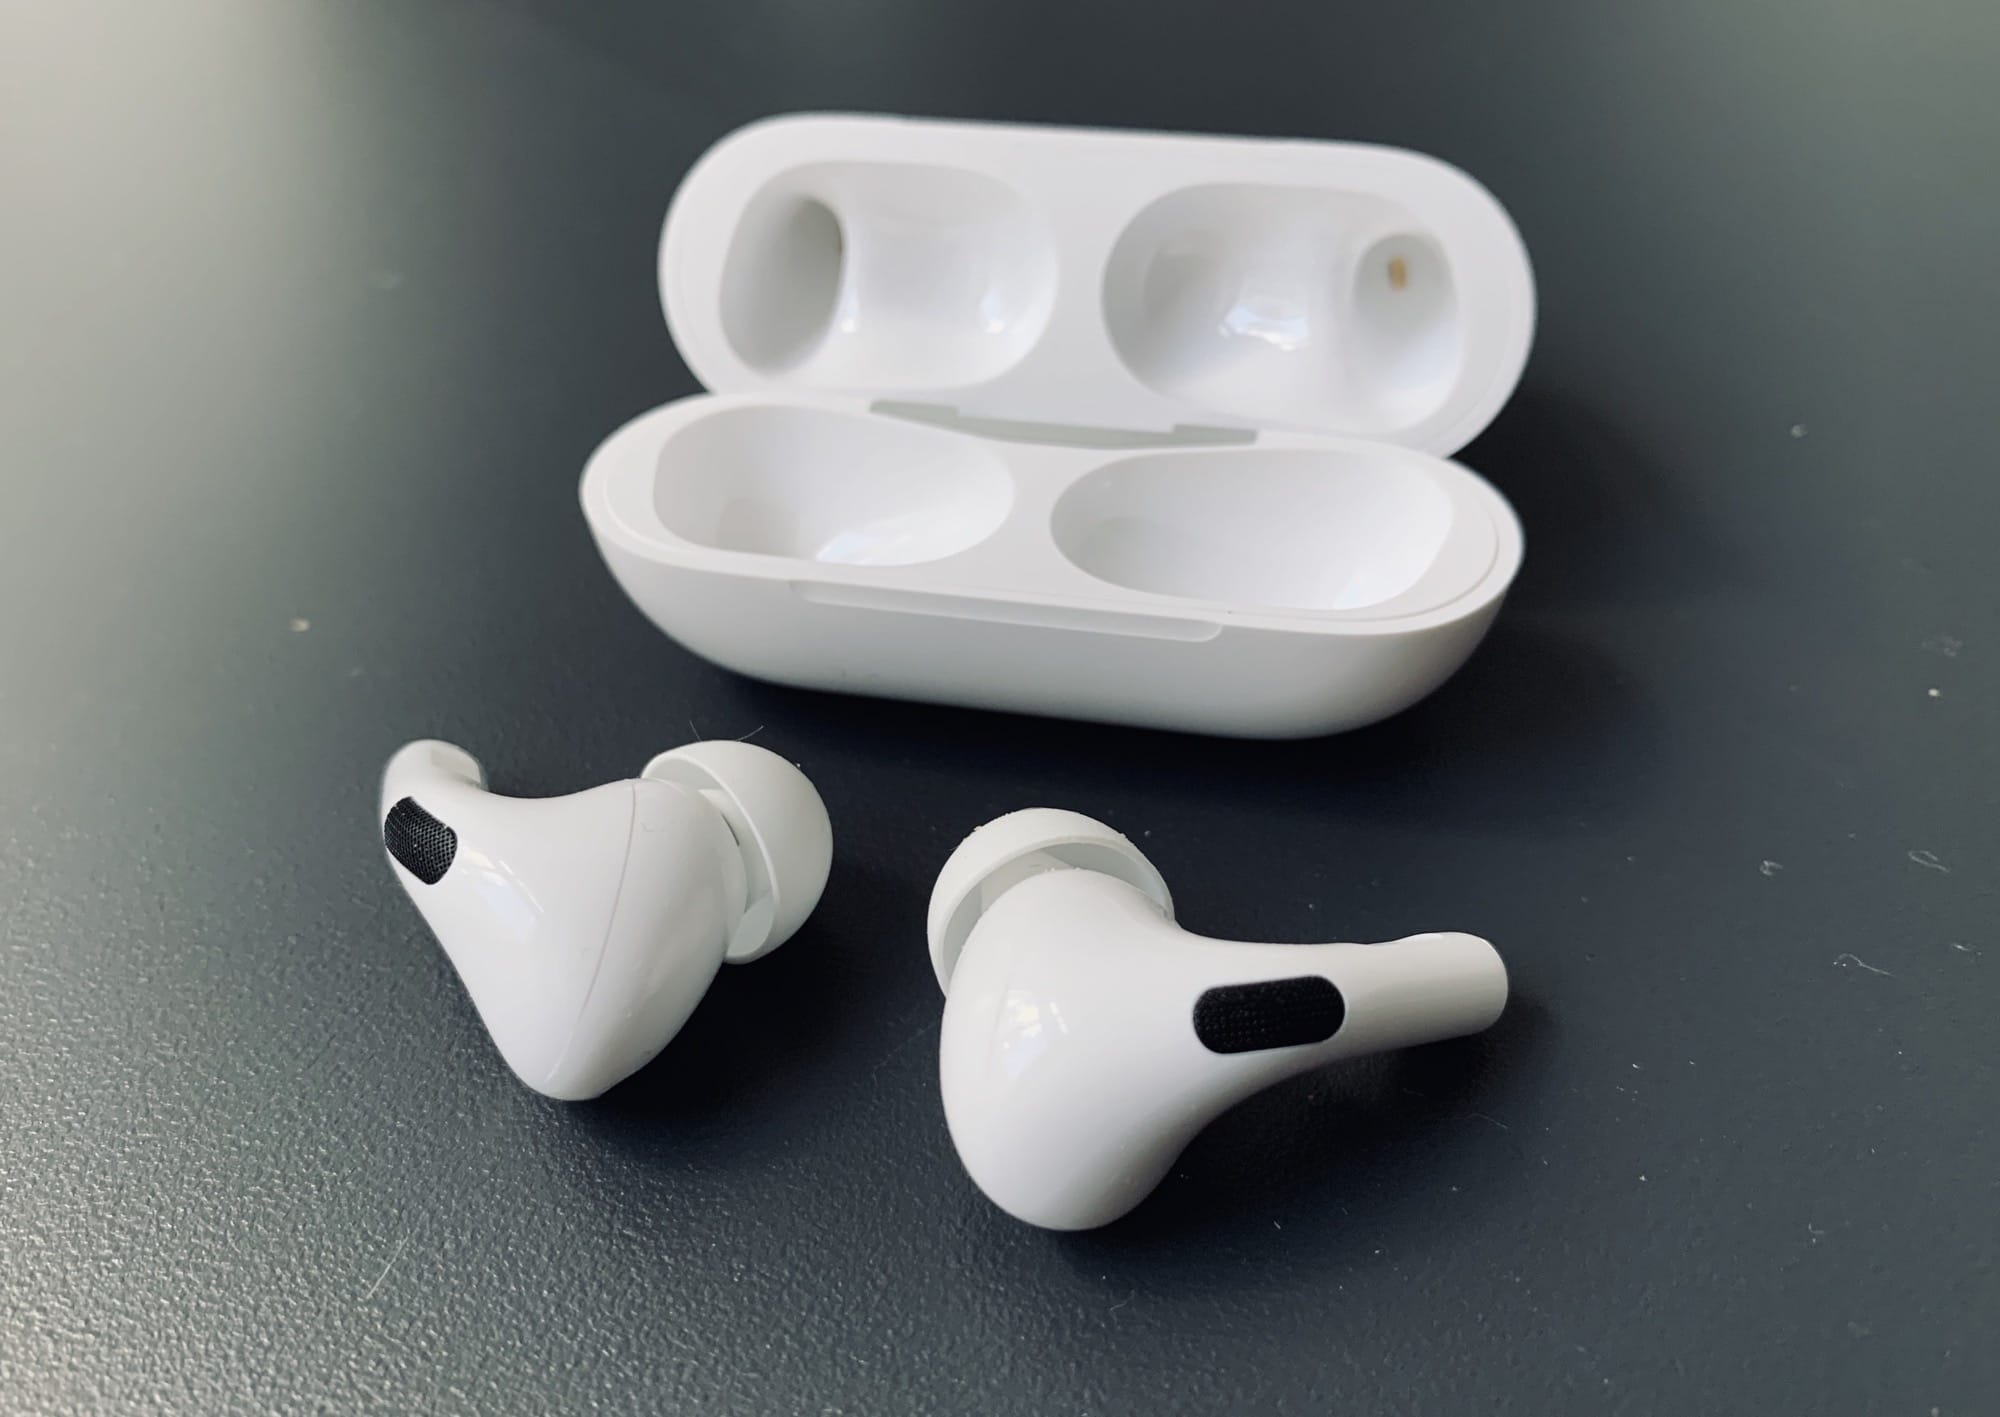 The AirPods Pro noise cancellation makes all the difference.